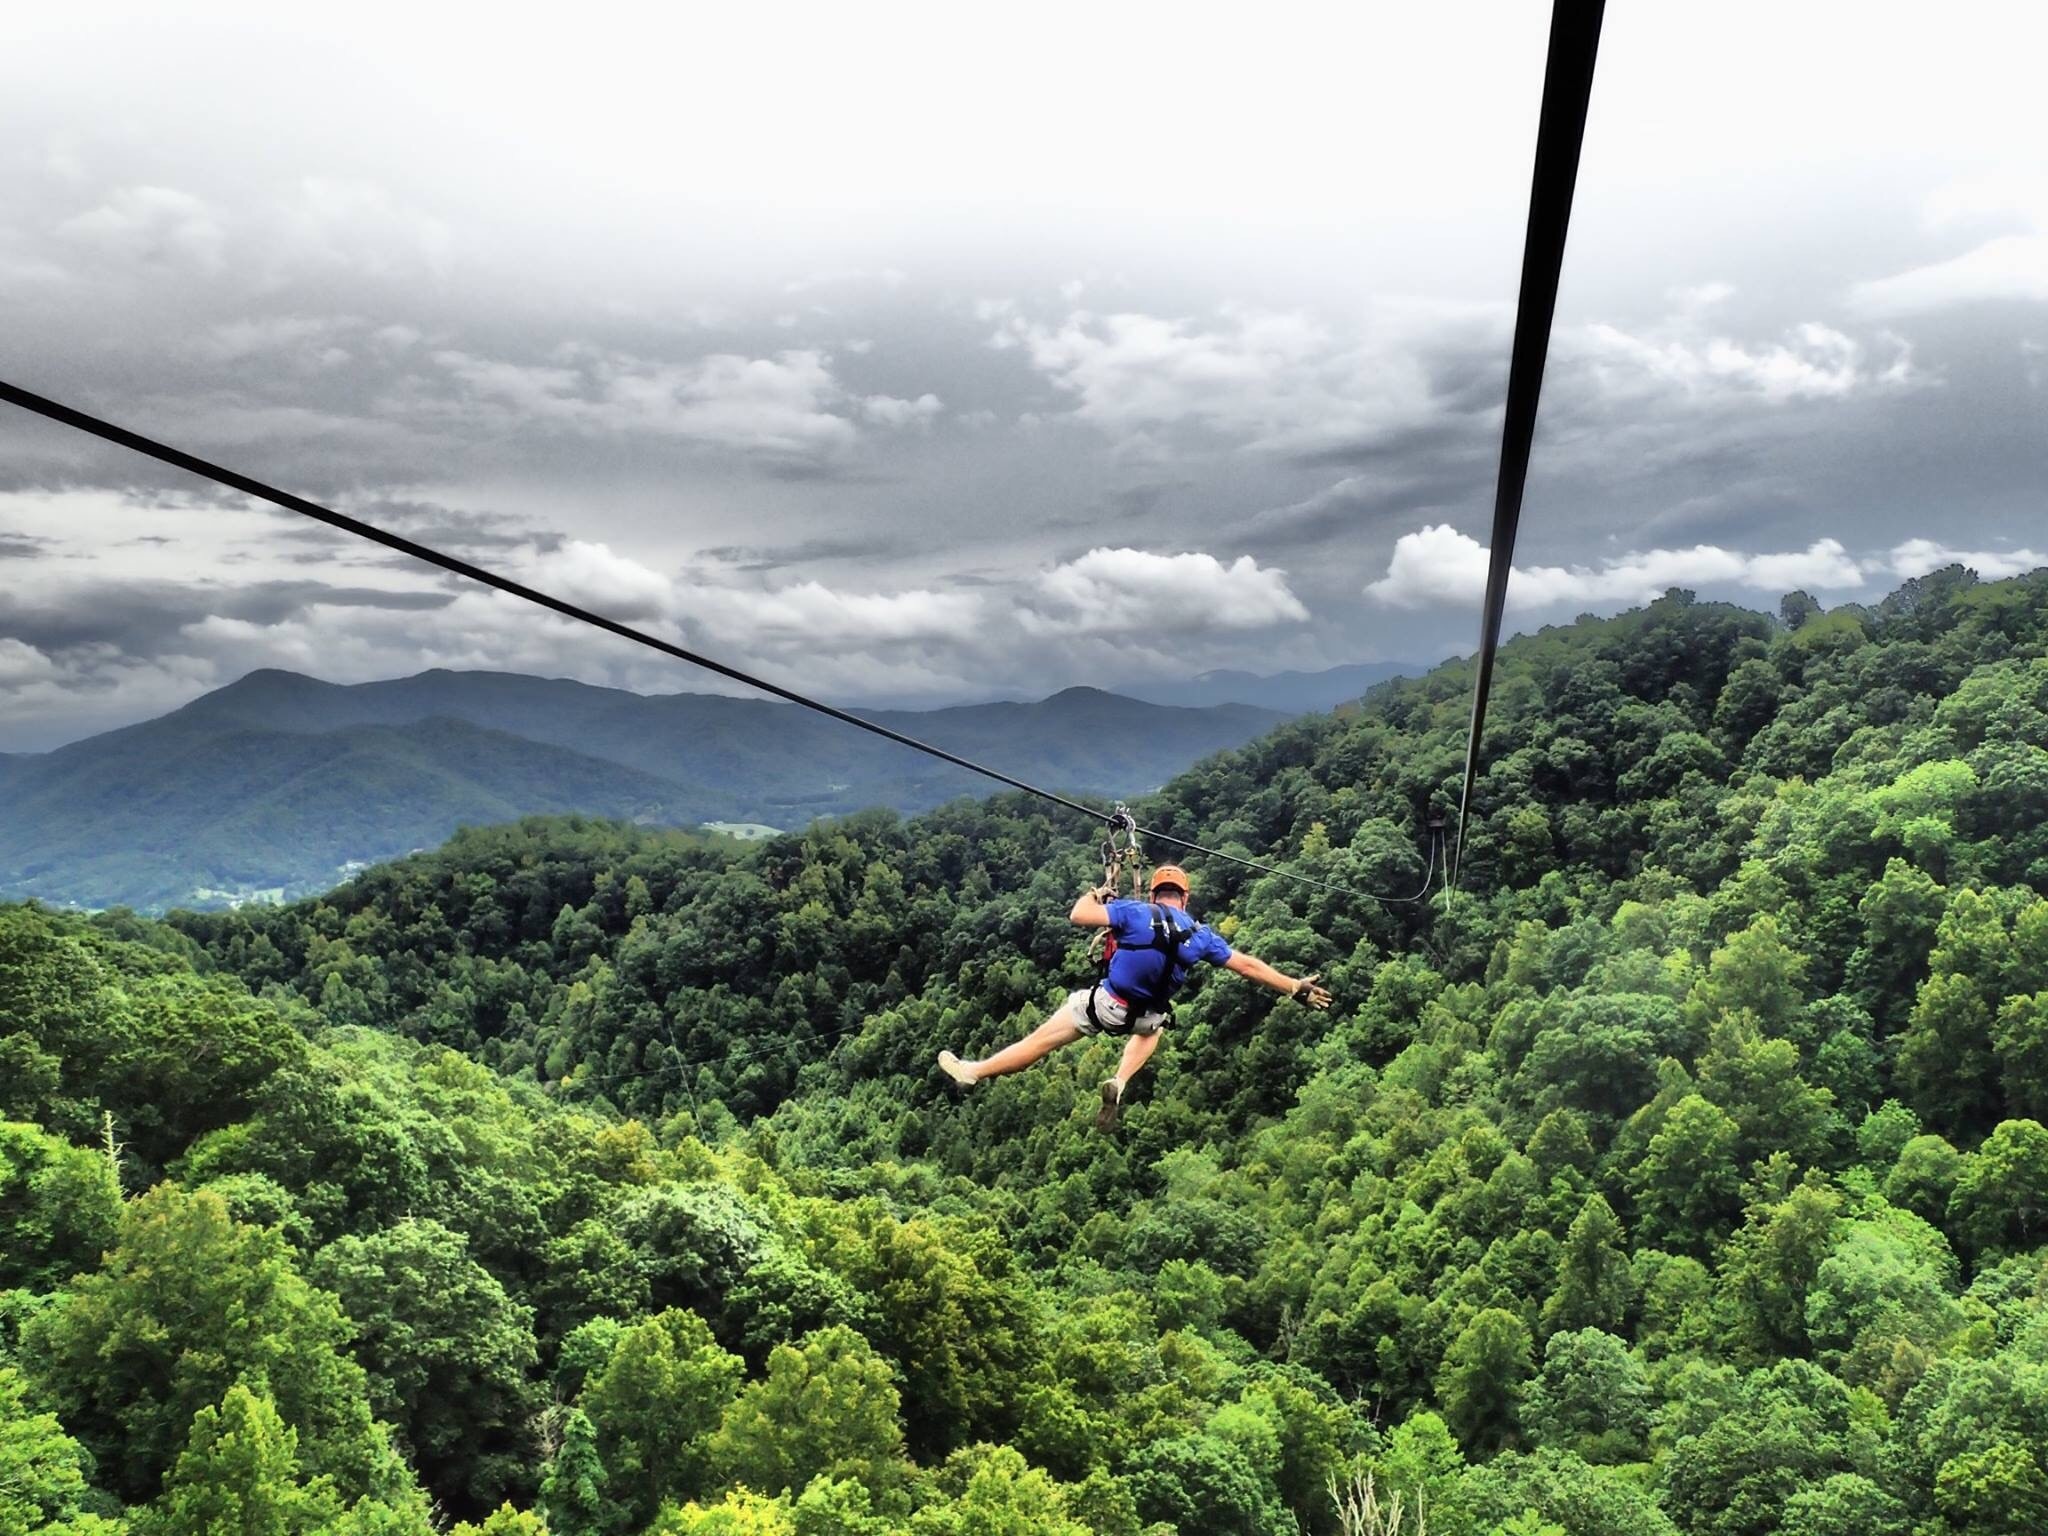 The Blue Ridge Experience's 3600 foot 2nd zip. Awesome views of the Blue Ridge Mountains!